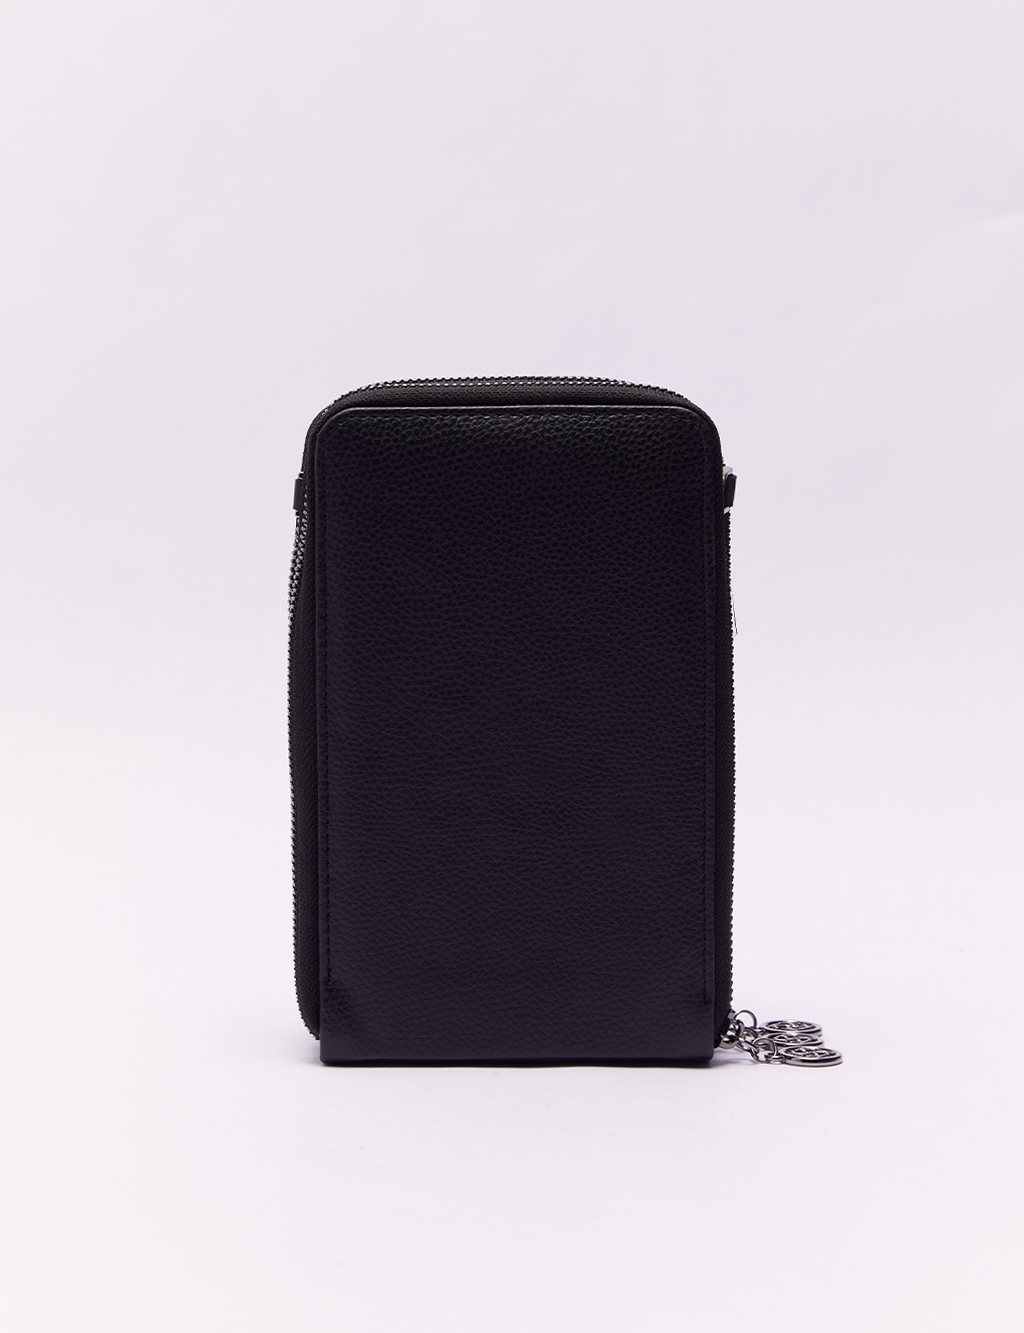 Three Compartment Natural Leather Wallet Bag Black